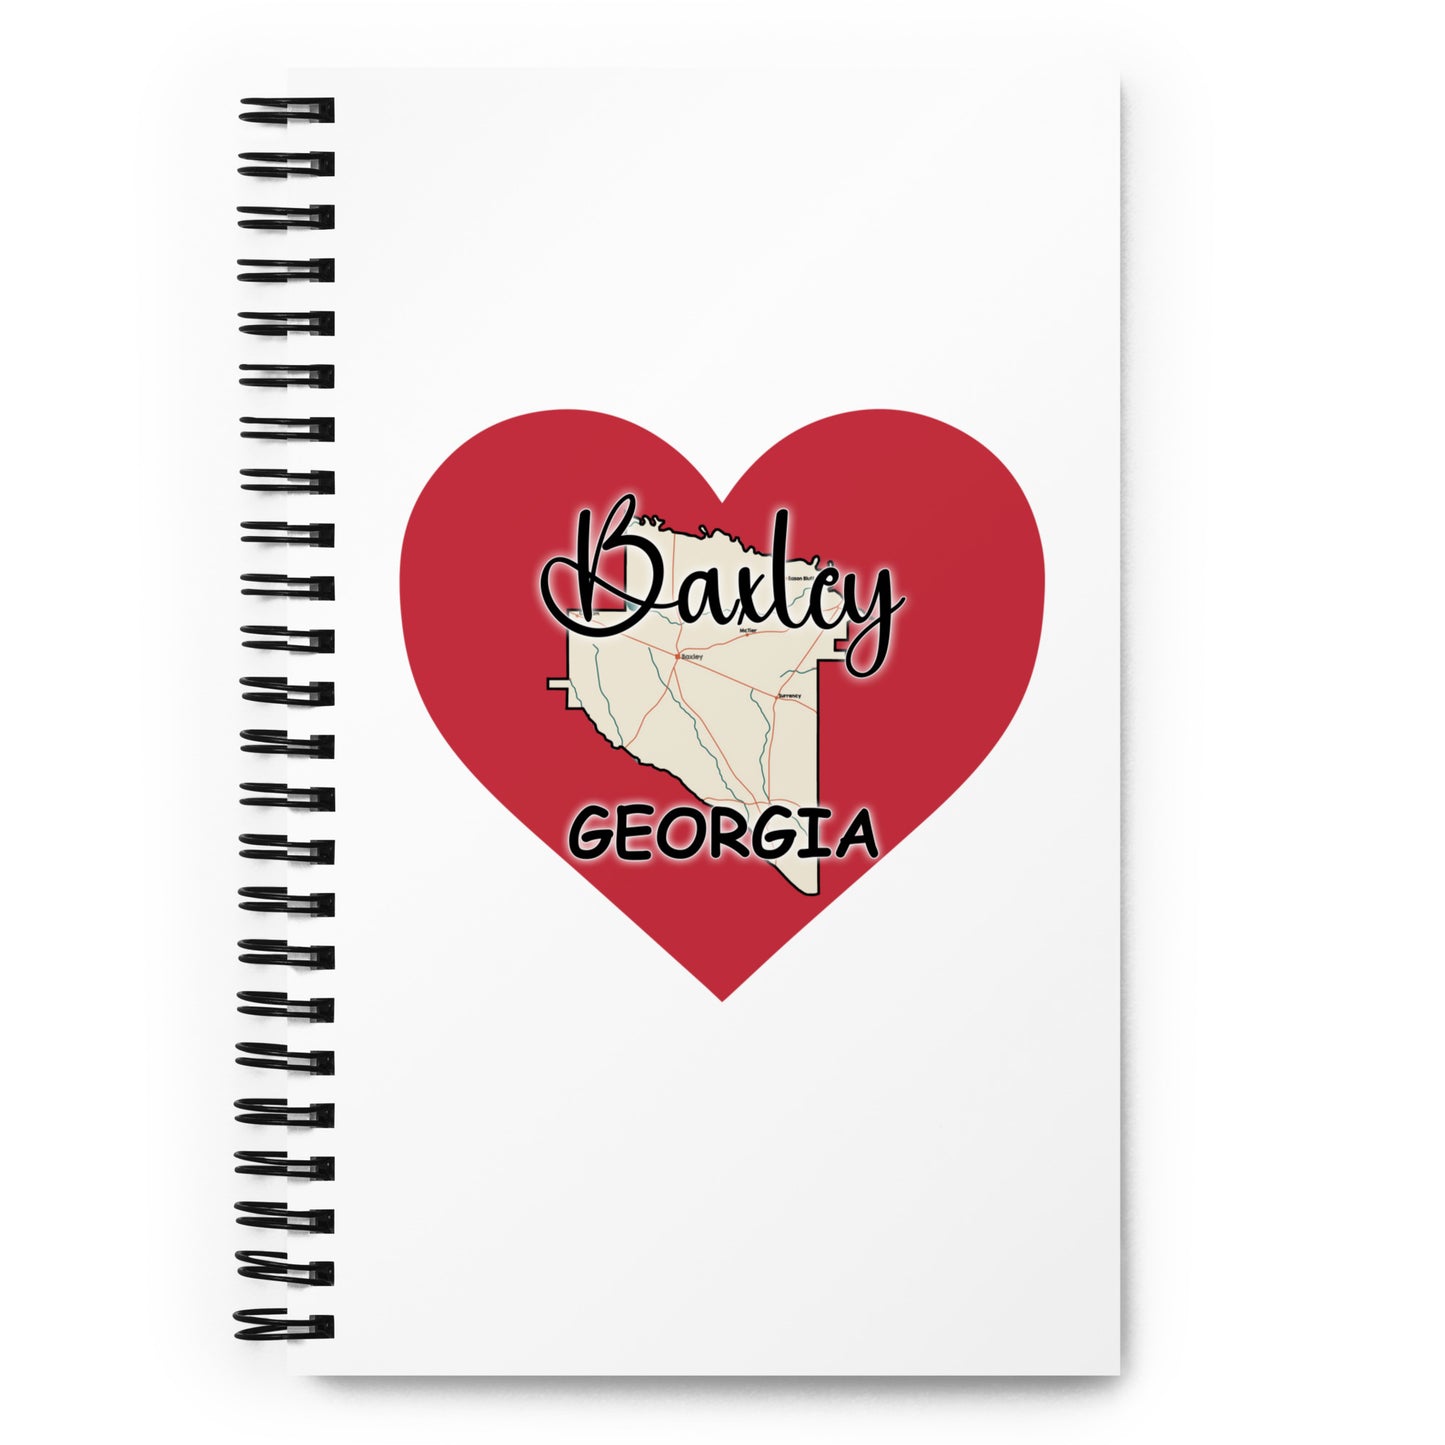 Baxley Georgia - County on Large Heart Spiral Notebook